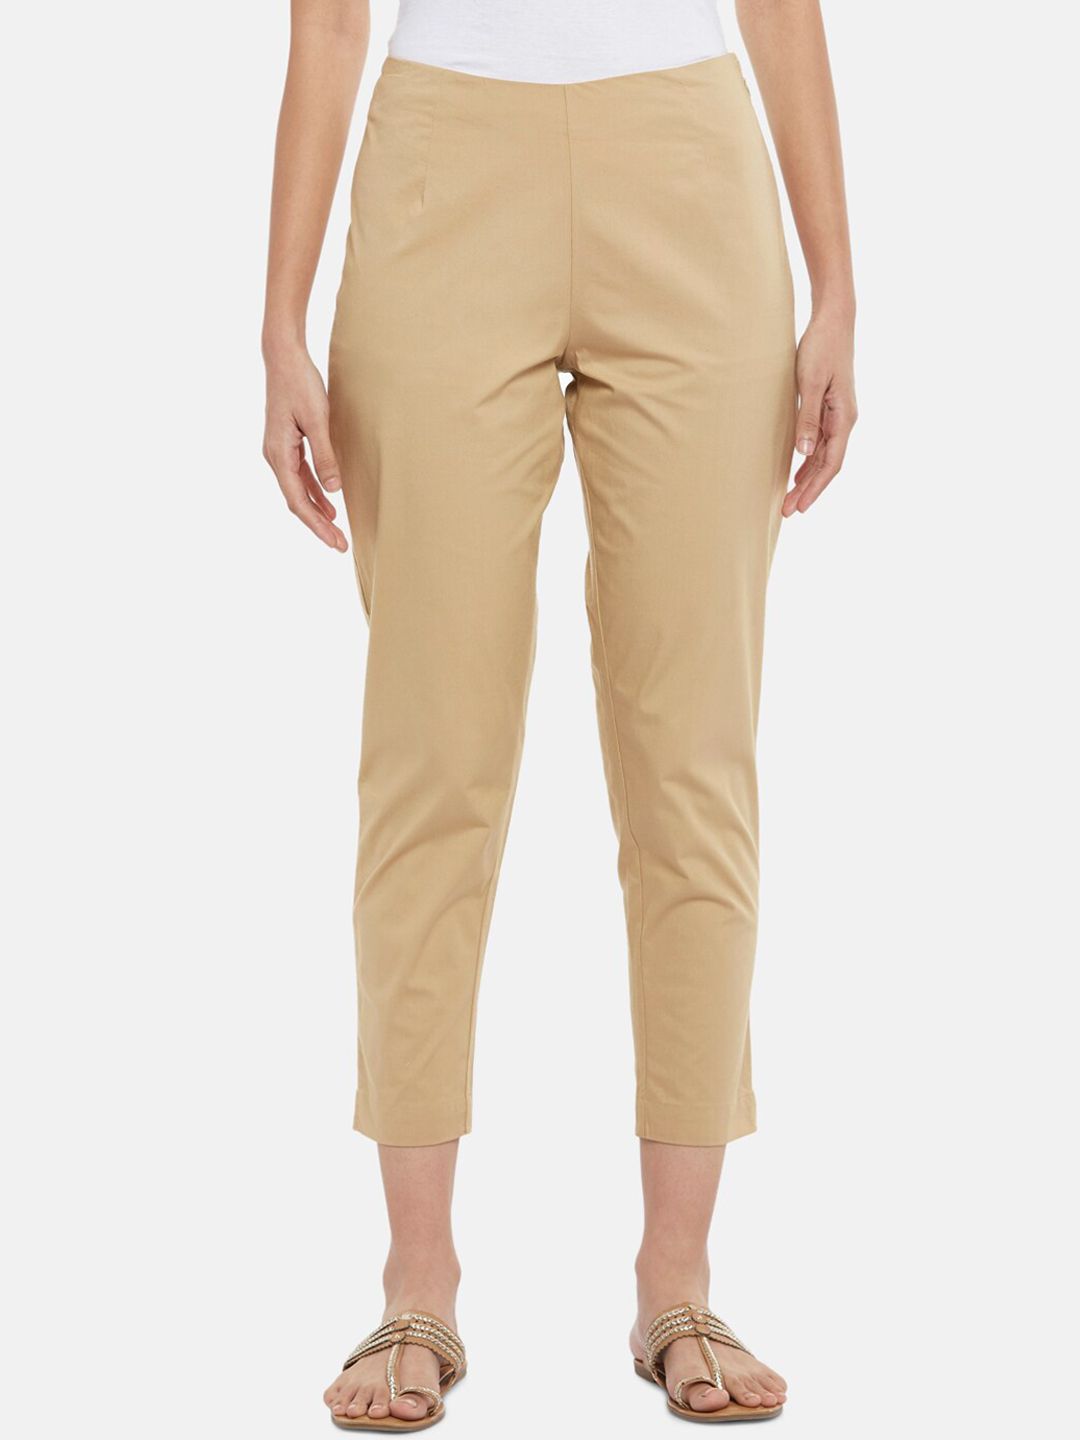 RANGMANCH BY PANTALOONS Women Beige Trousers Price in India